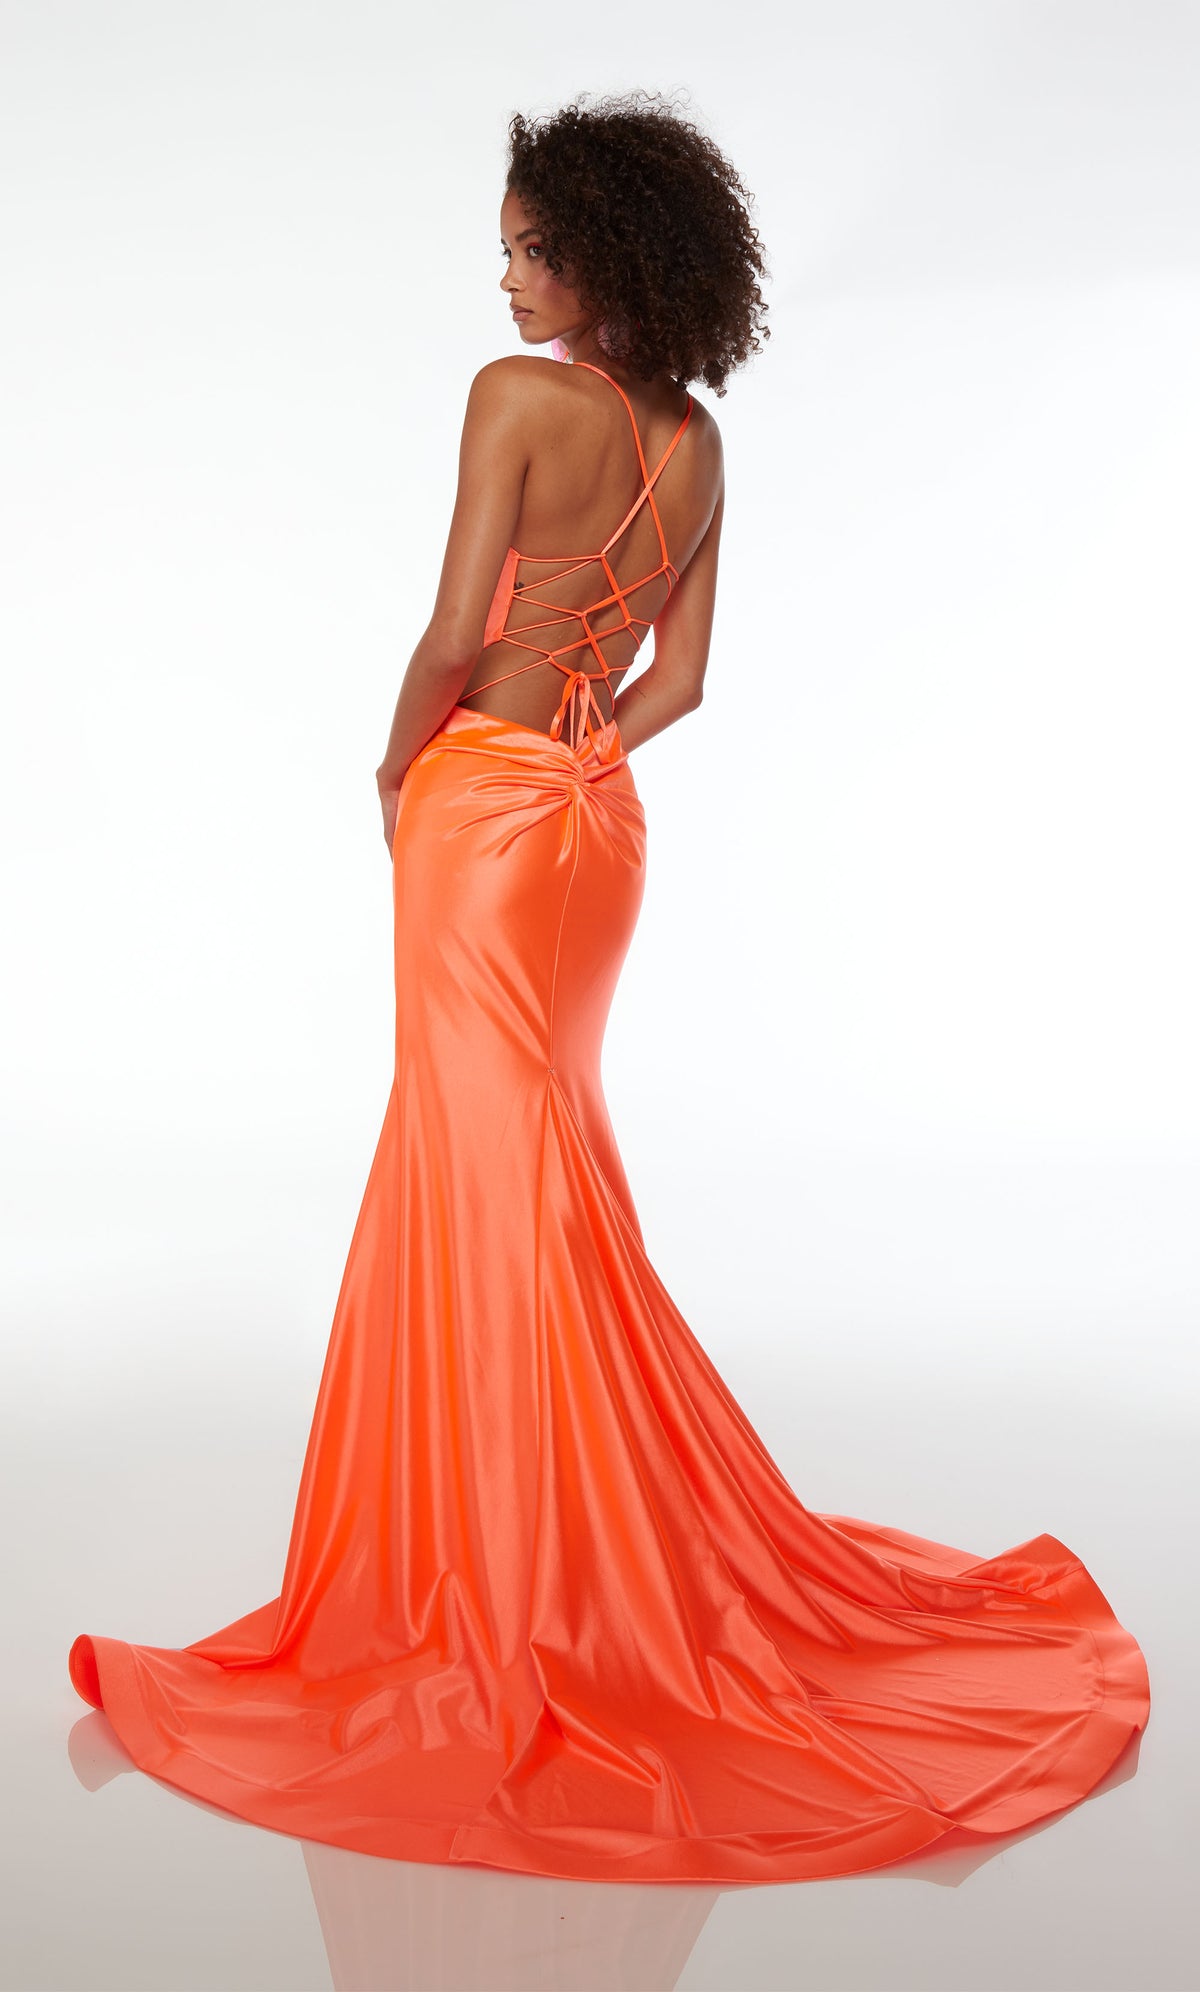 Form fitting orange formal dress in an mermaid silhouette, V neckline, side cutouts, lace-up back, ruching detail, and an long glamorous train.